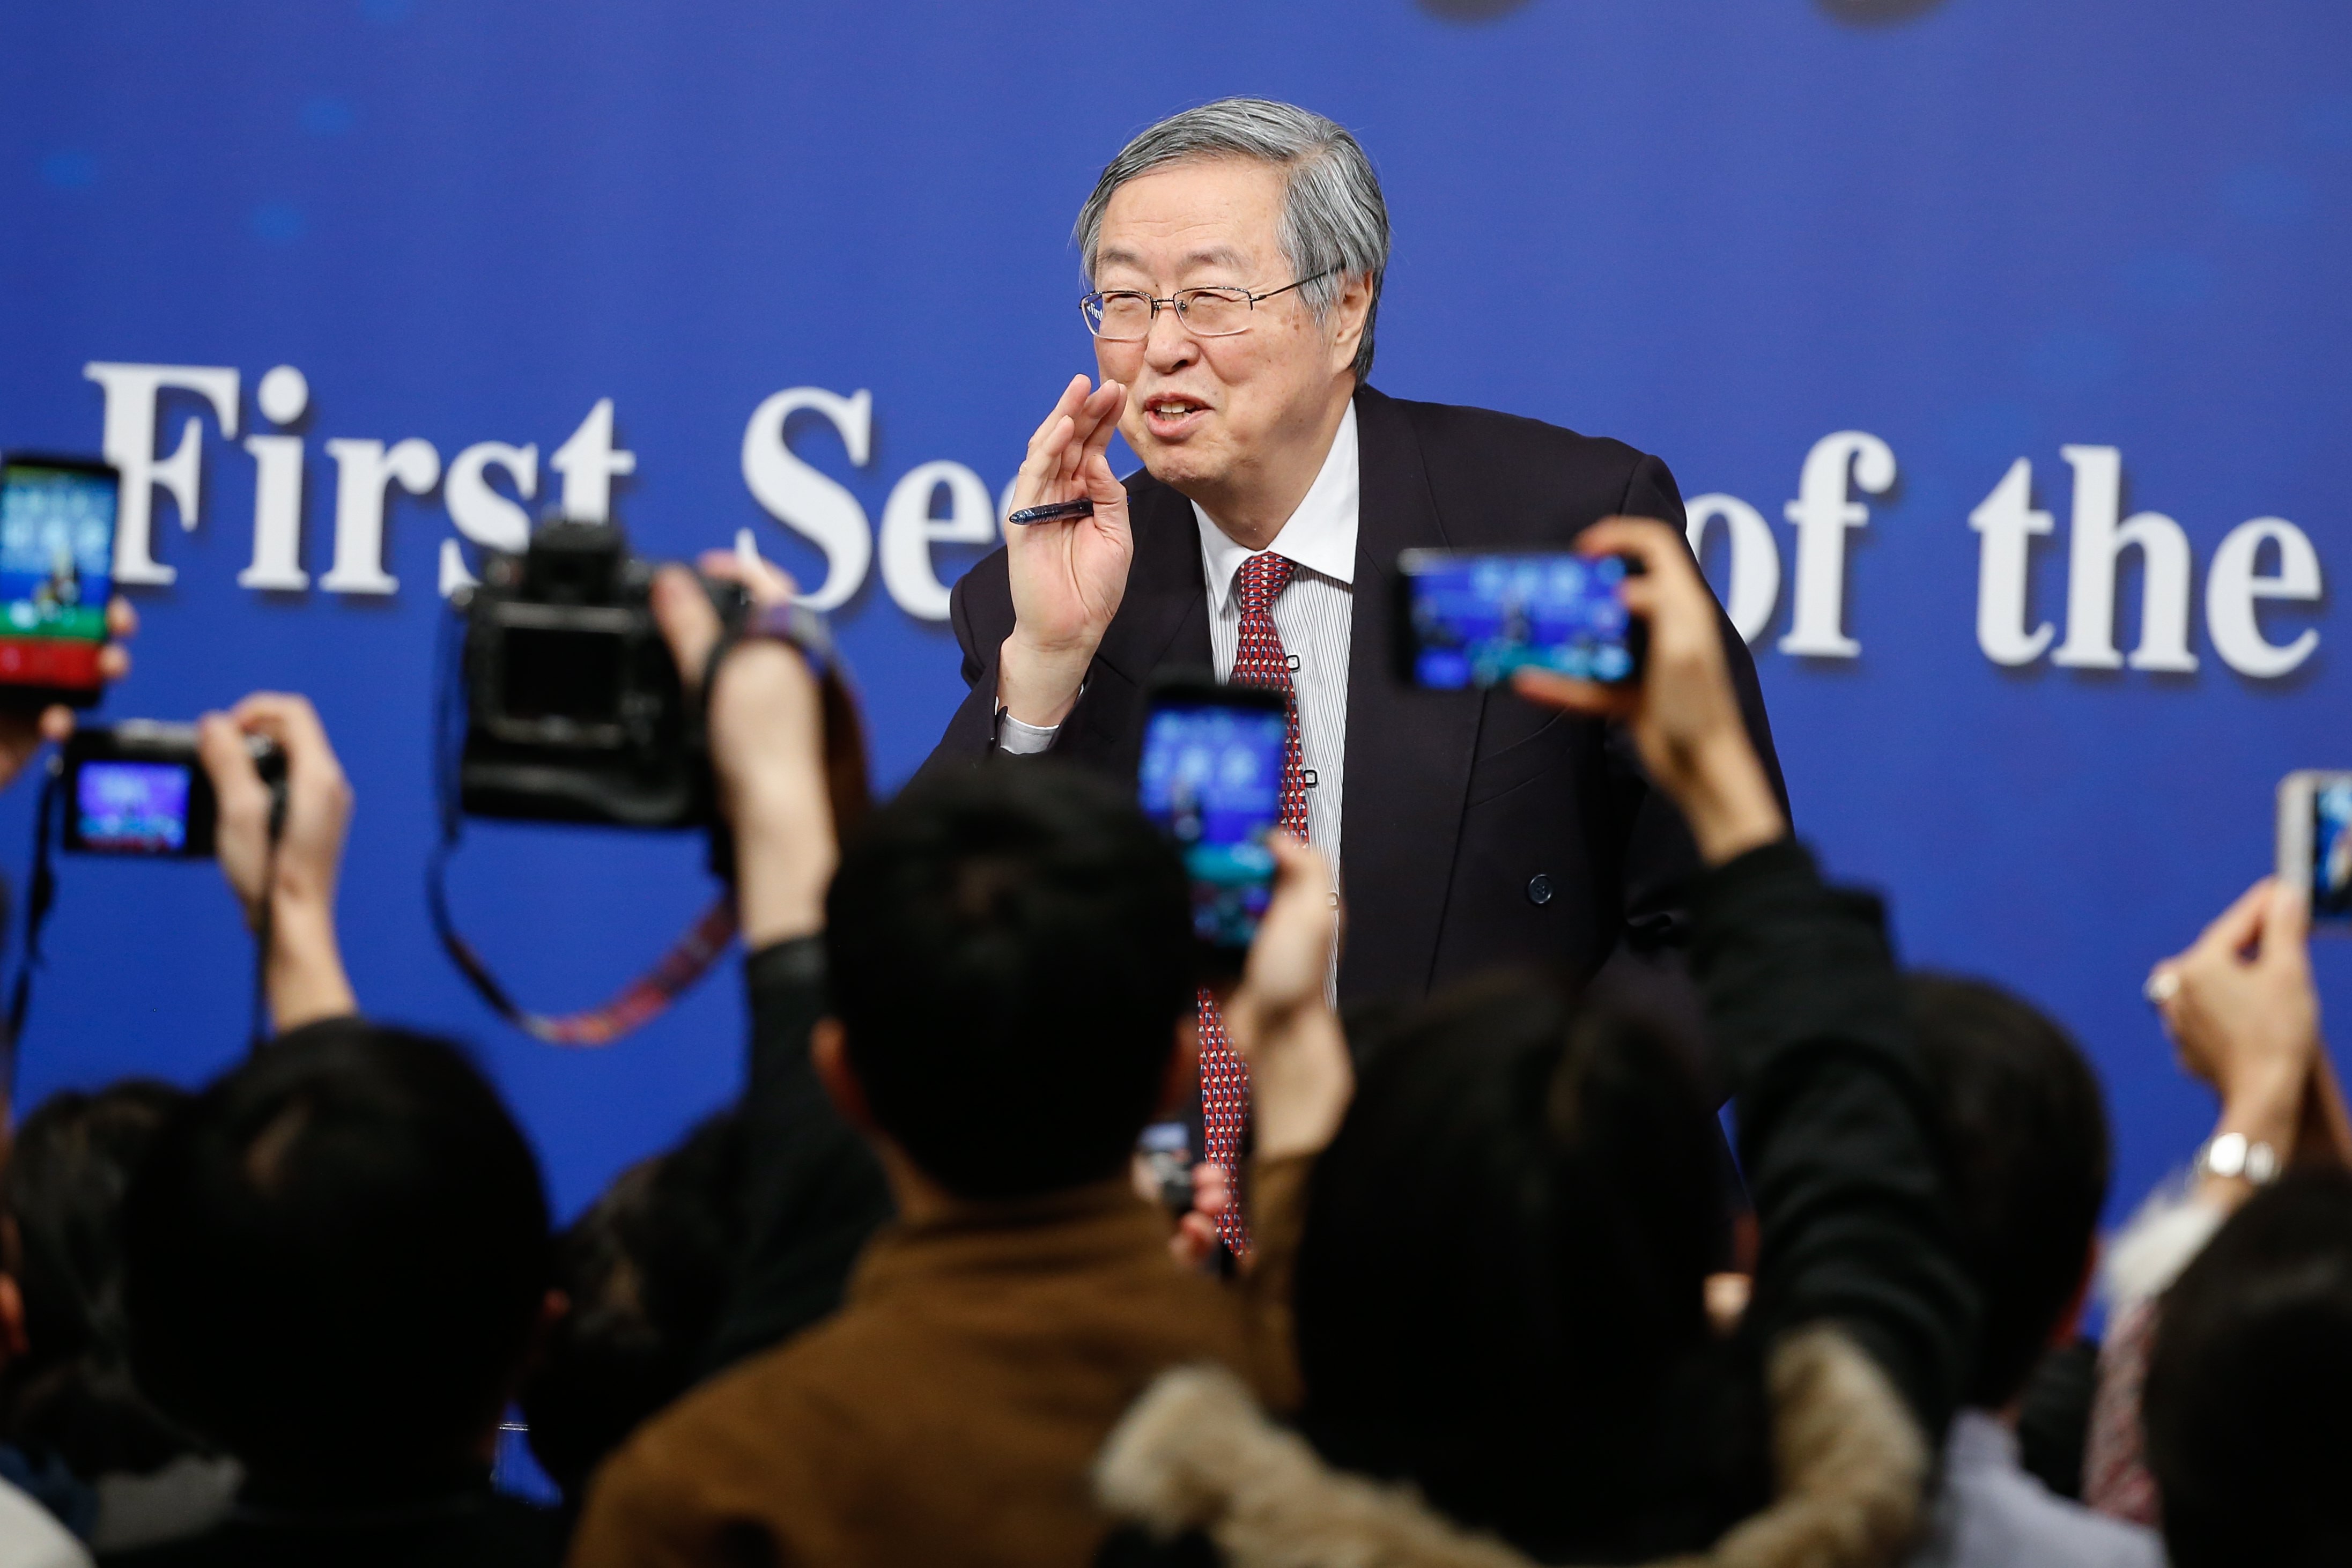 Zhou Xiaochuan, governor of the People's Bank of China (PBOC), gestures after concluding a press conference on the sidelines of China's National People's Congress (NPC) in Beijing, China, 09 March 2018. Photo: EPA-EFE